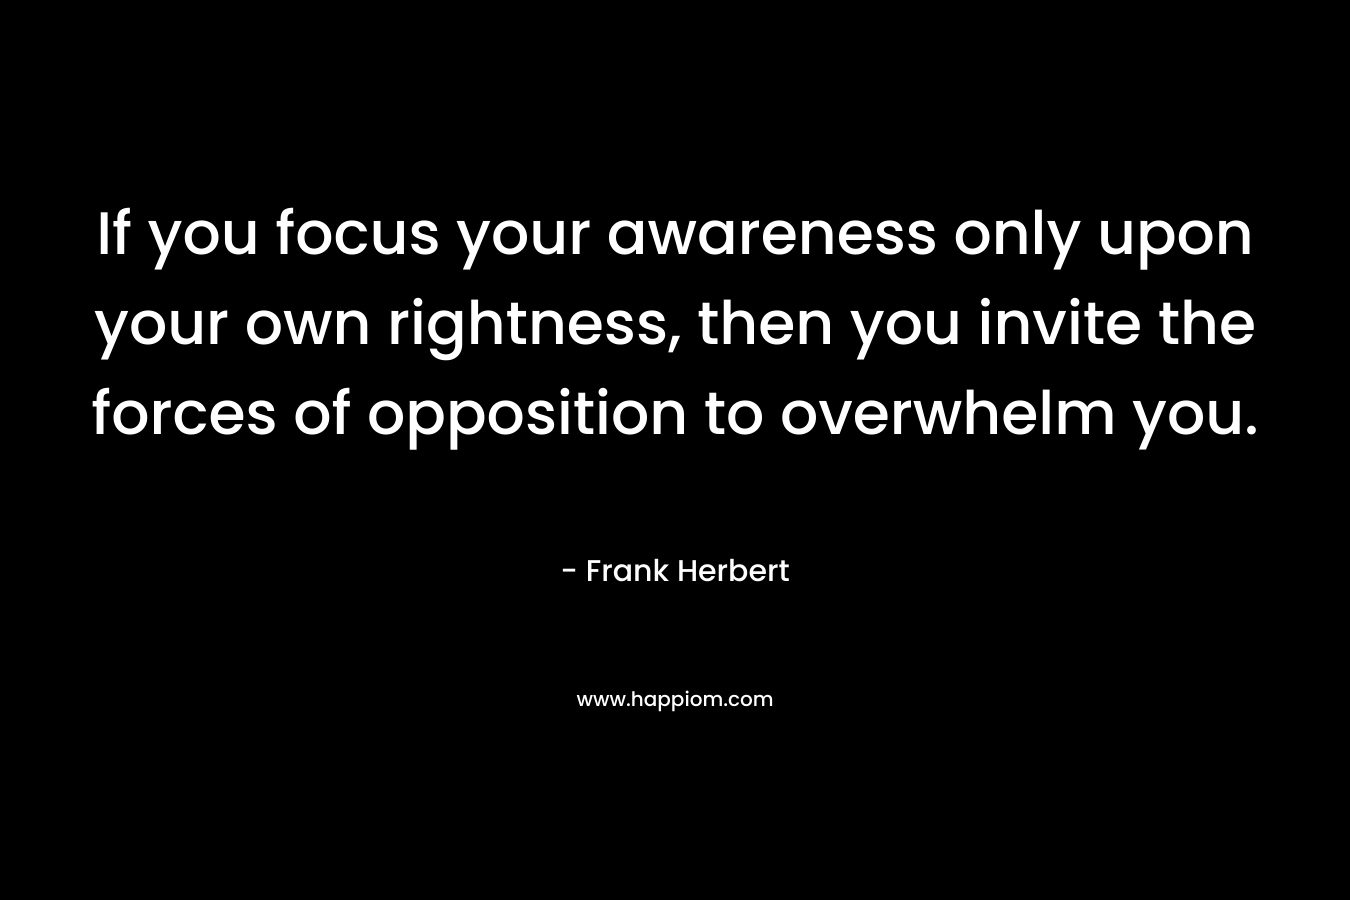 If you focus your awareness only upon your own rightness, then you invite the forces of opposition to overwhelm you. – Frank Herbert